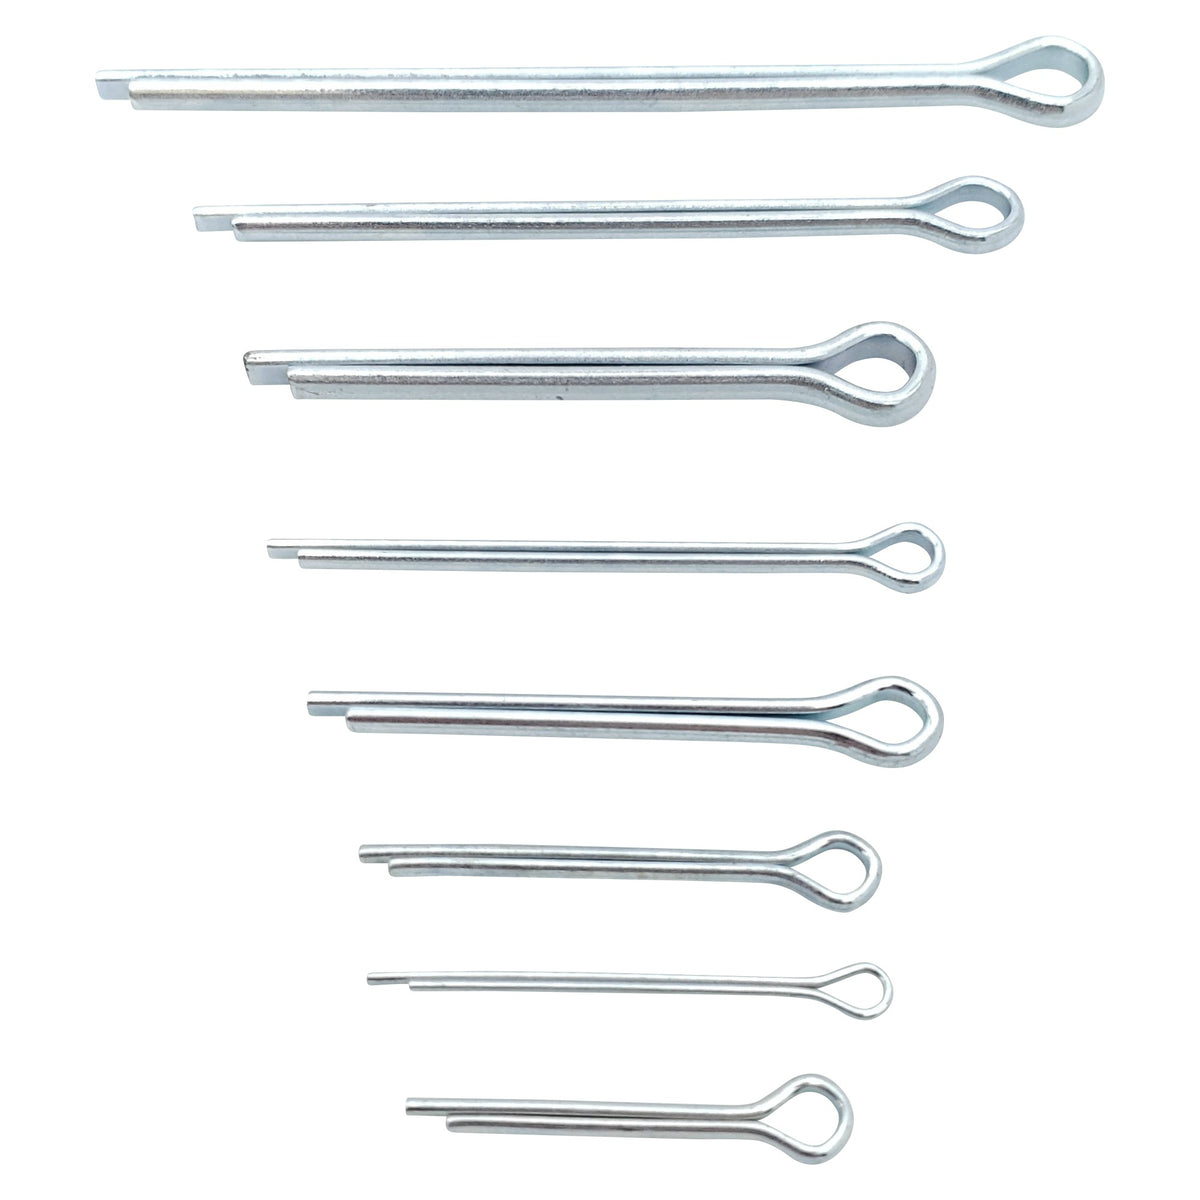 700 Qty Zinc Plated Cotter Pin Assortment 8 Sizes Bcp412 Bcp Fasteners 